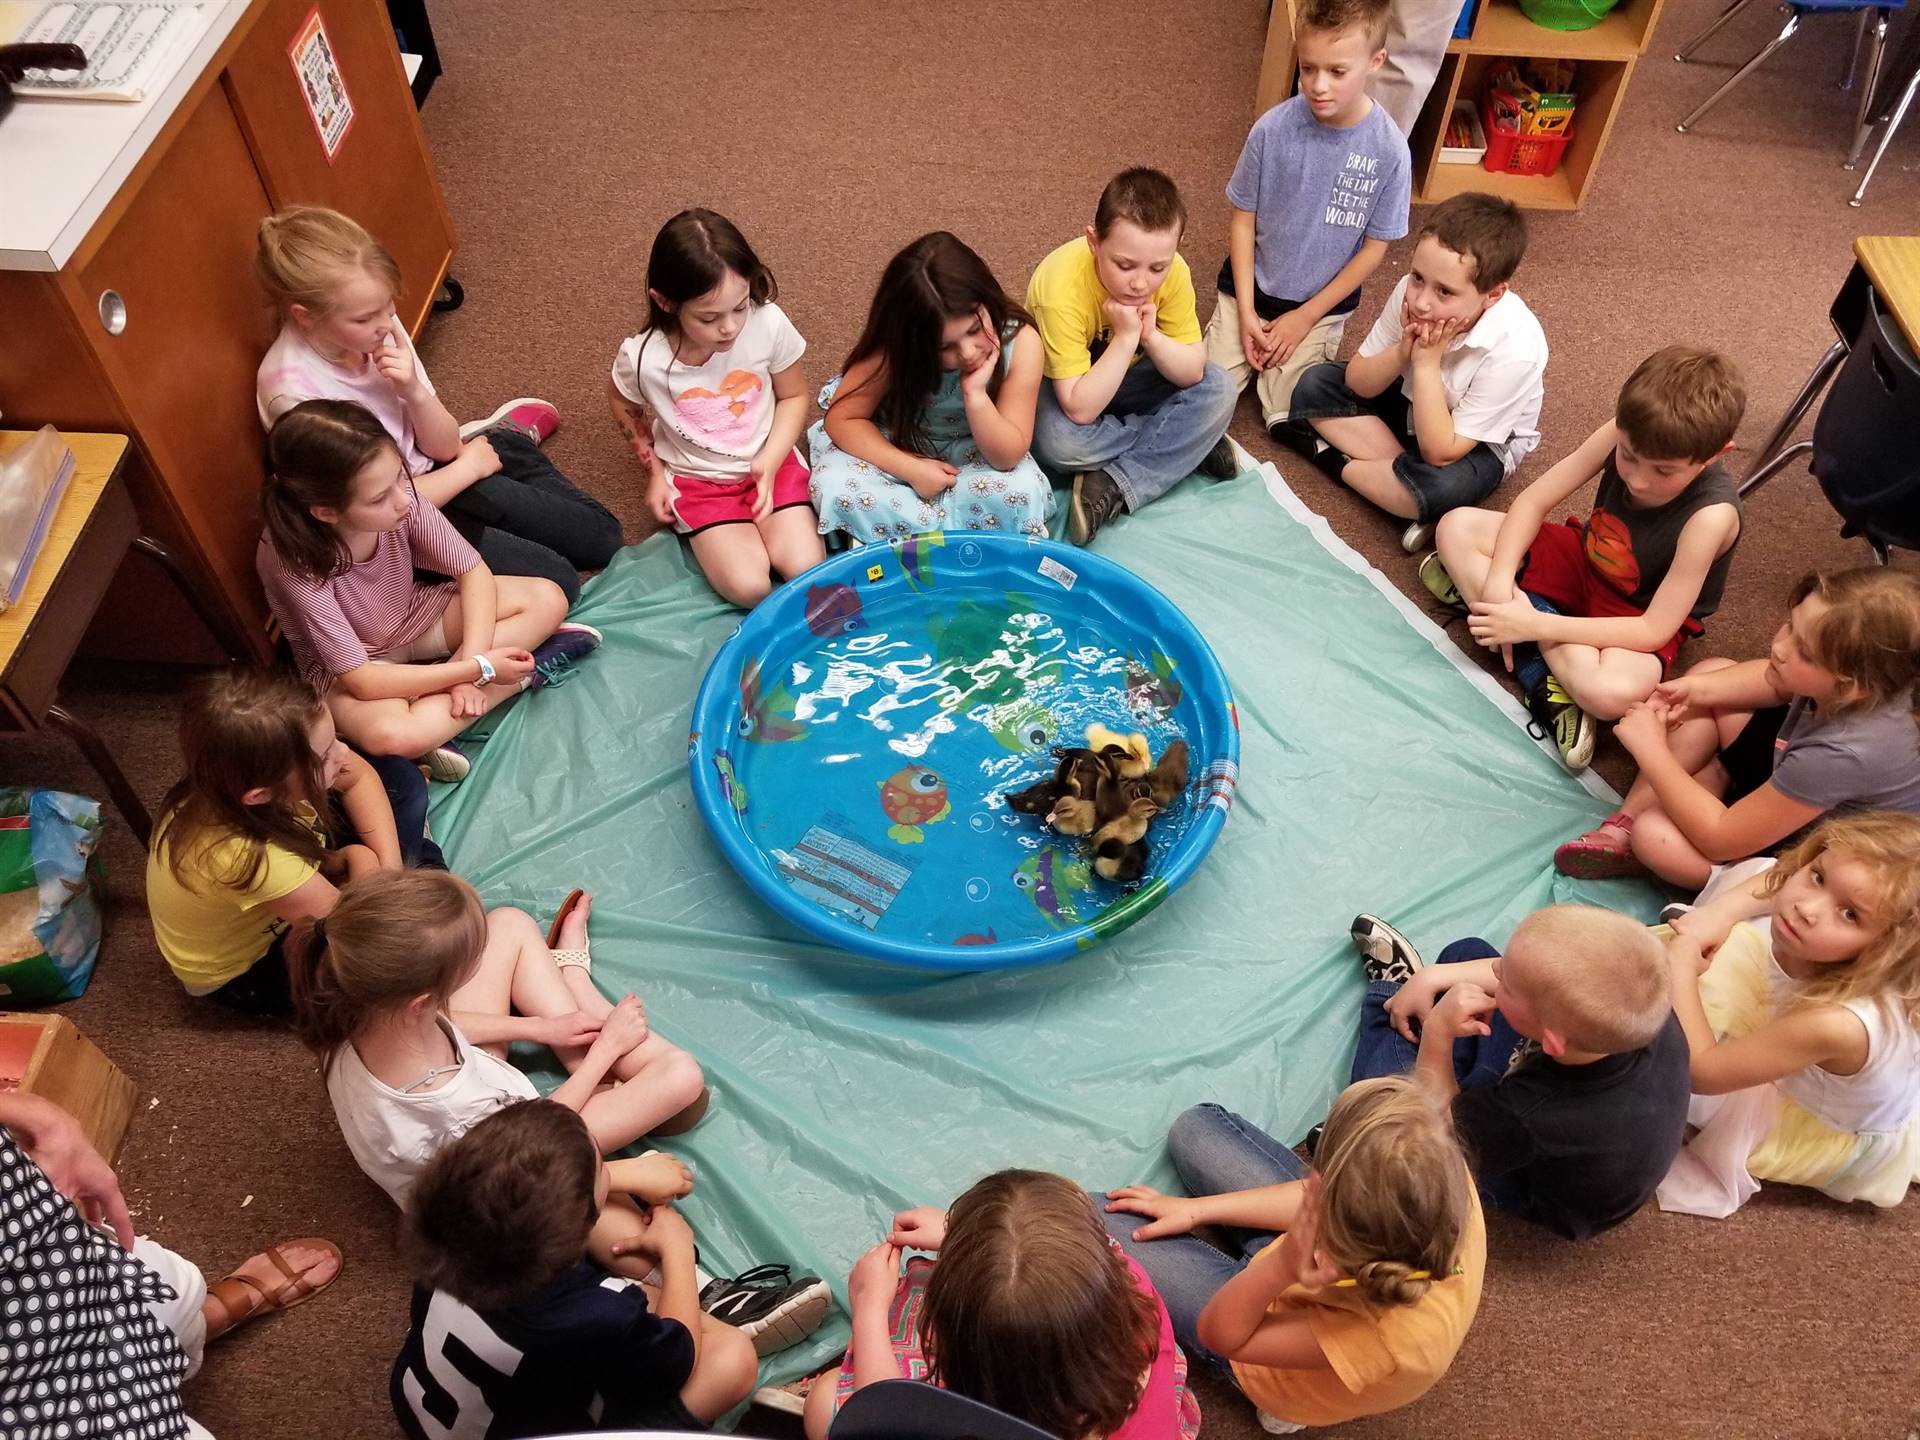 first grade class observe ducklings as they swim.